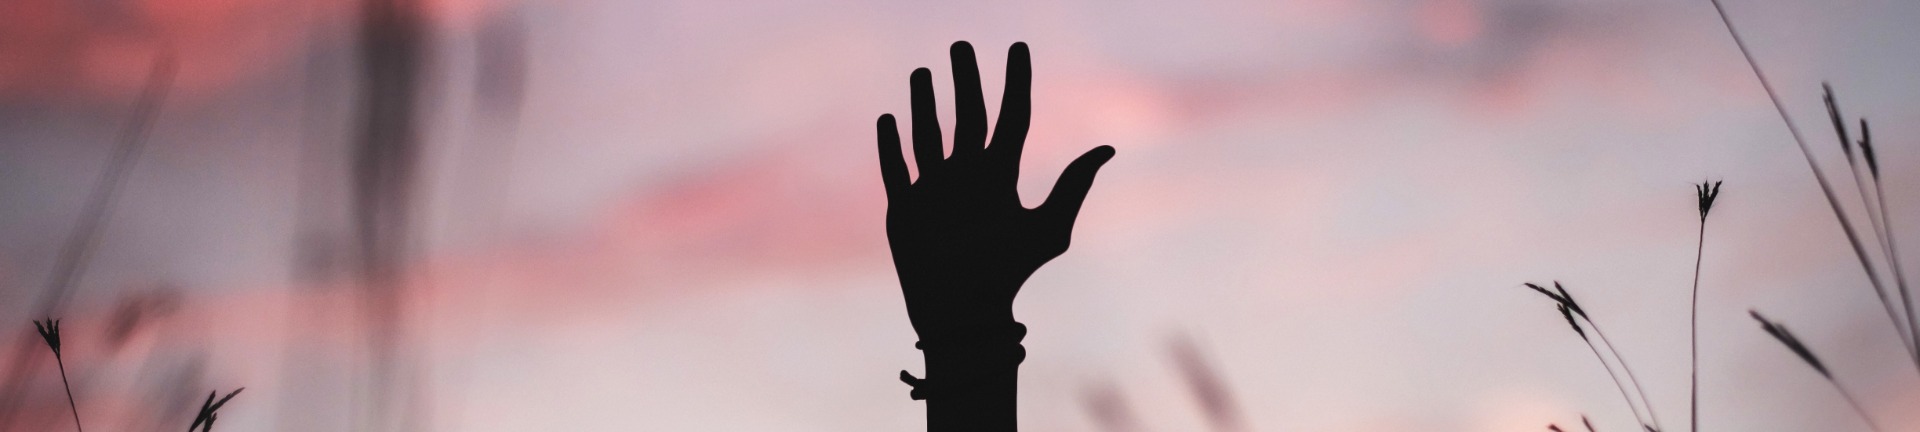 silhouette of hand against a sunset